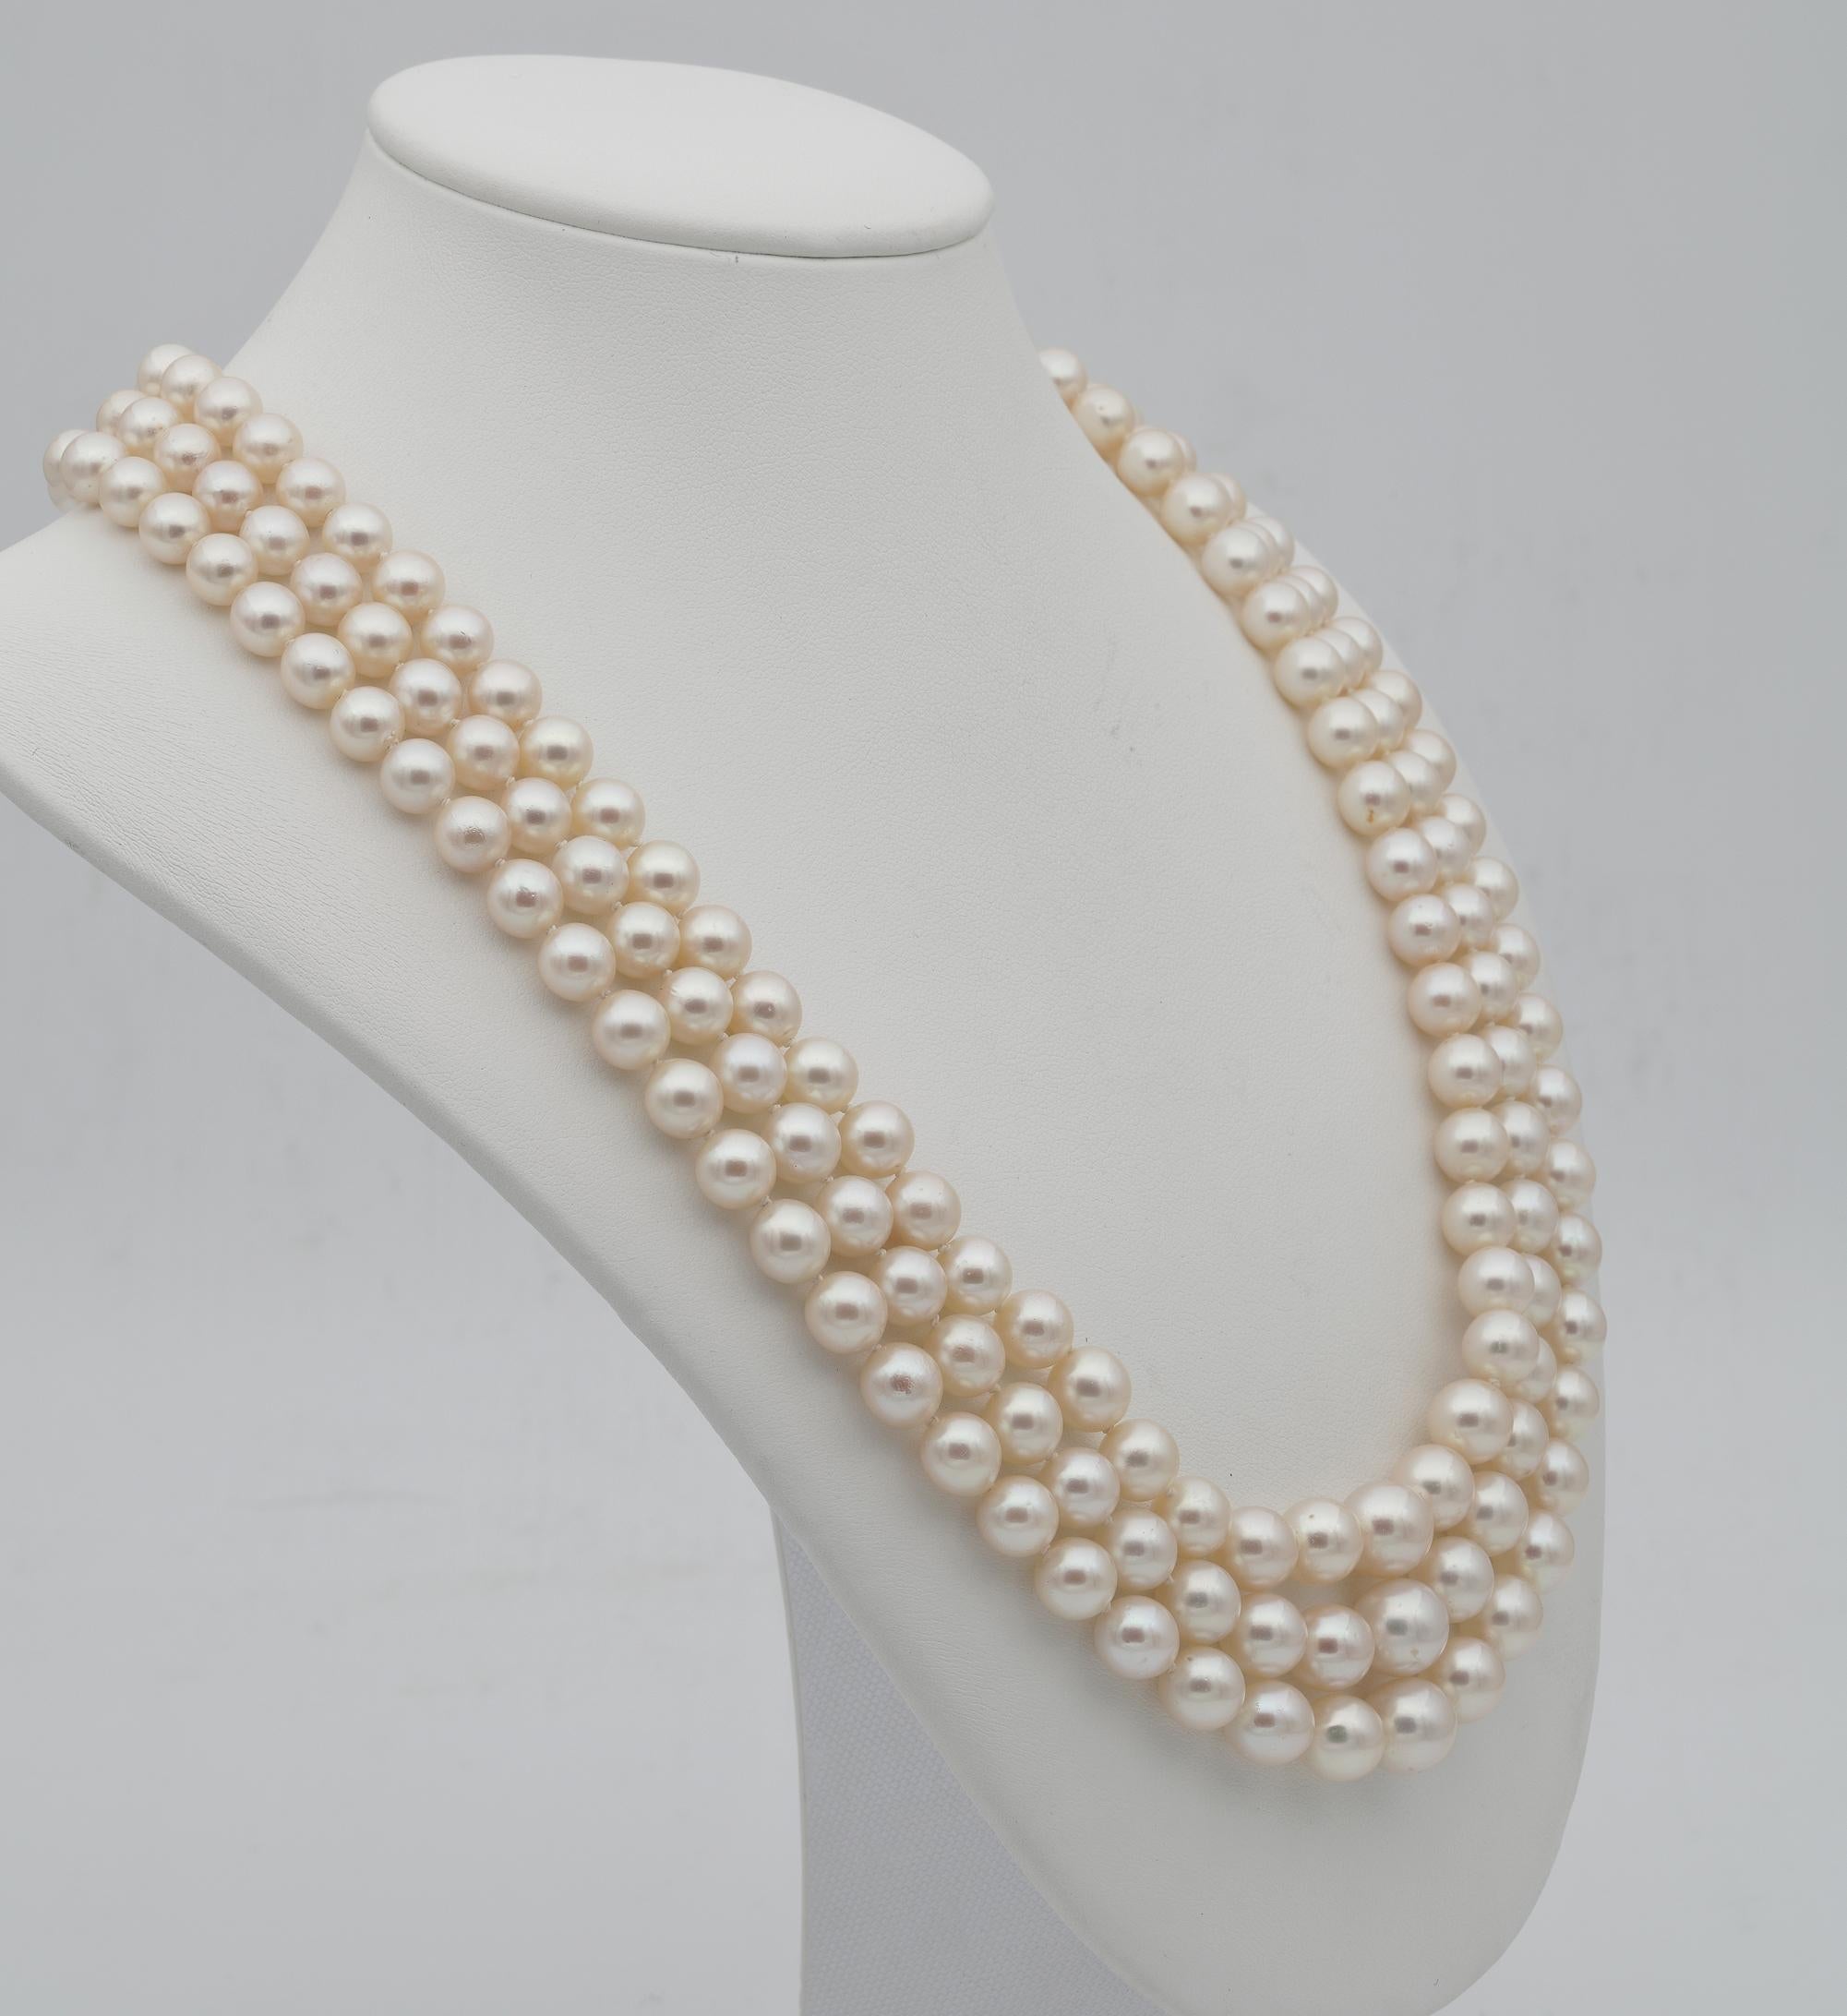 Deco Glamour

This magnificent triple strand pearl necklace dates 1925 ca

Throughout the history, the pearl, with its warm inner glow and shimmering iridescence, has been one of the most highly prized and sought after gems, symbolizing purity and